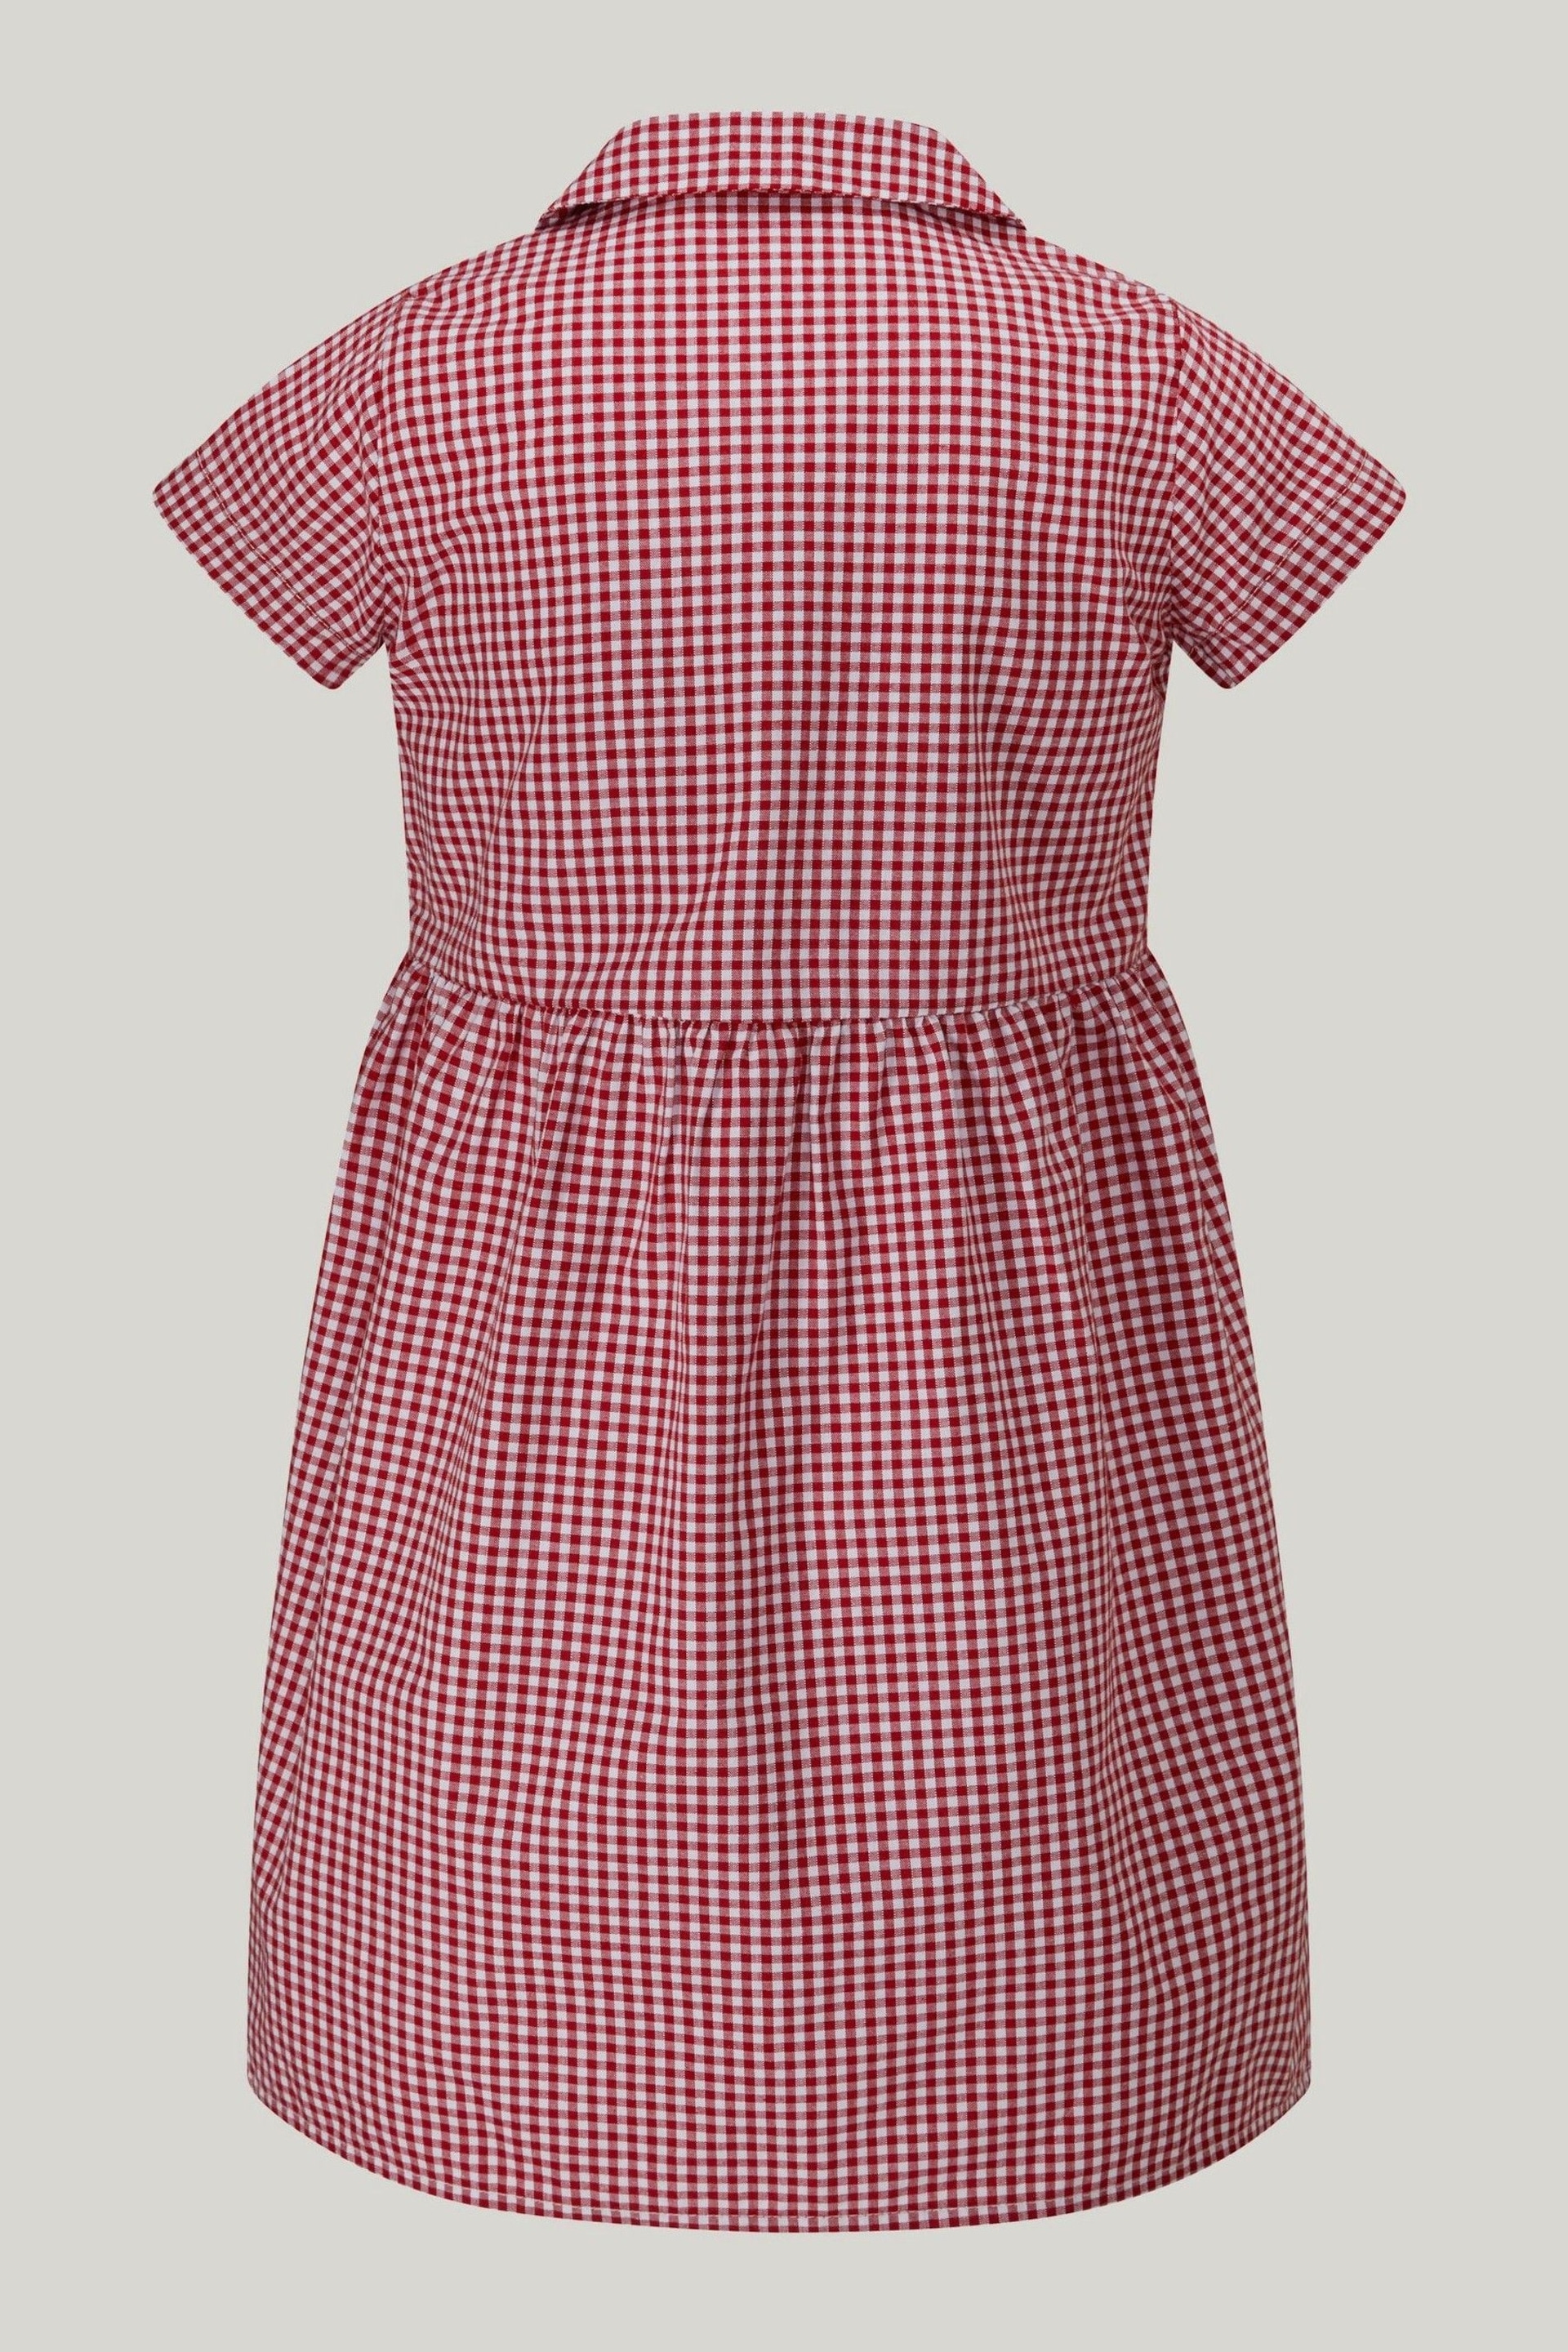 Trutex Red Gingham 2 Pack Button Front School Summer Dress - Image 5 of 6